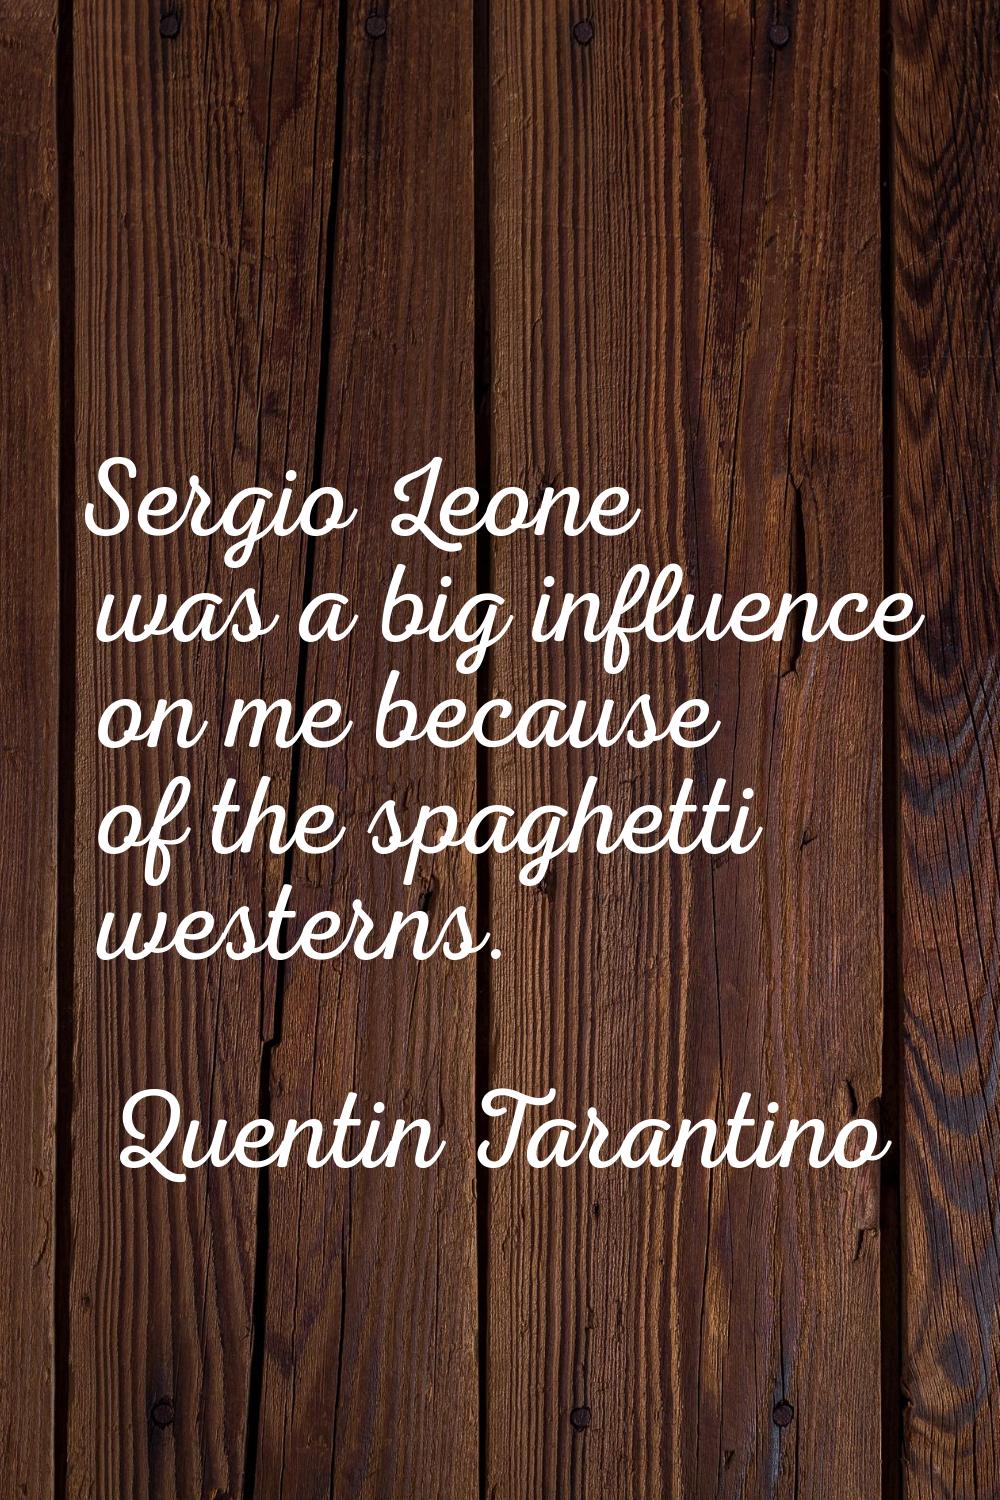 Sergio Leone was a big influence on me because of the spaghetti westerns.